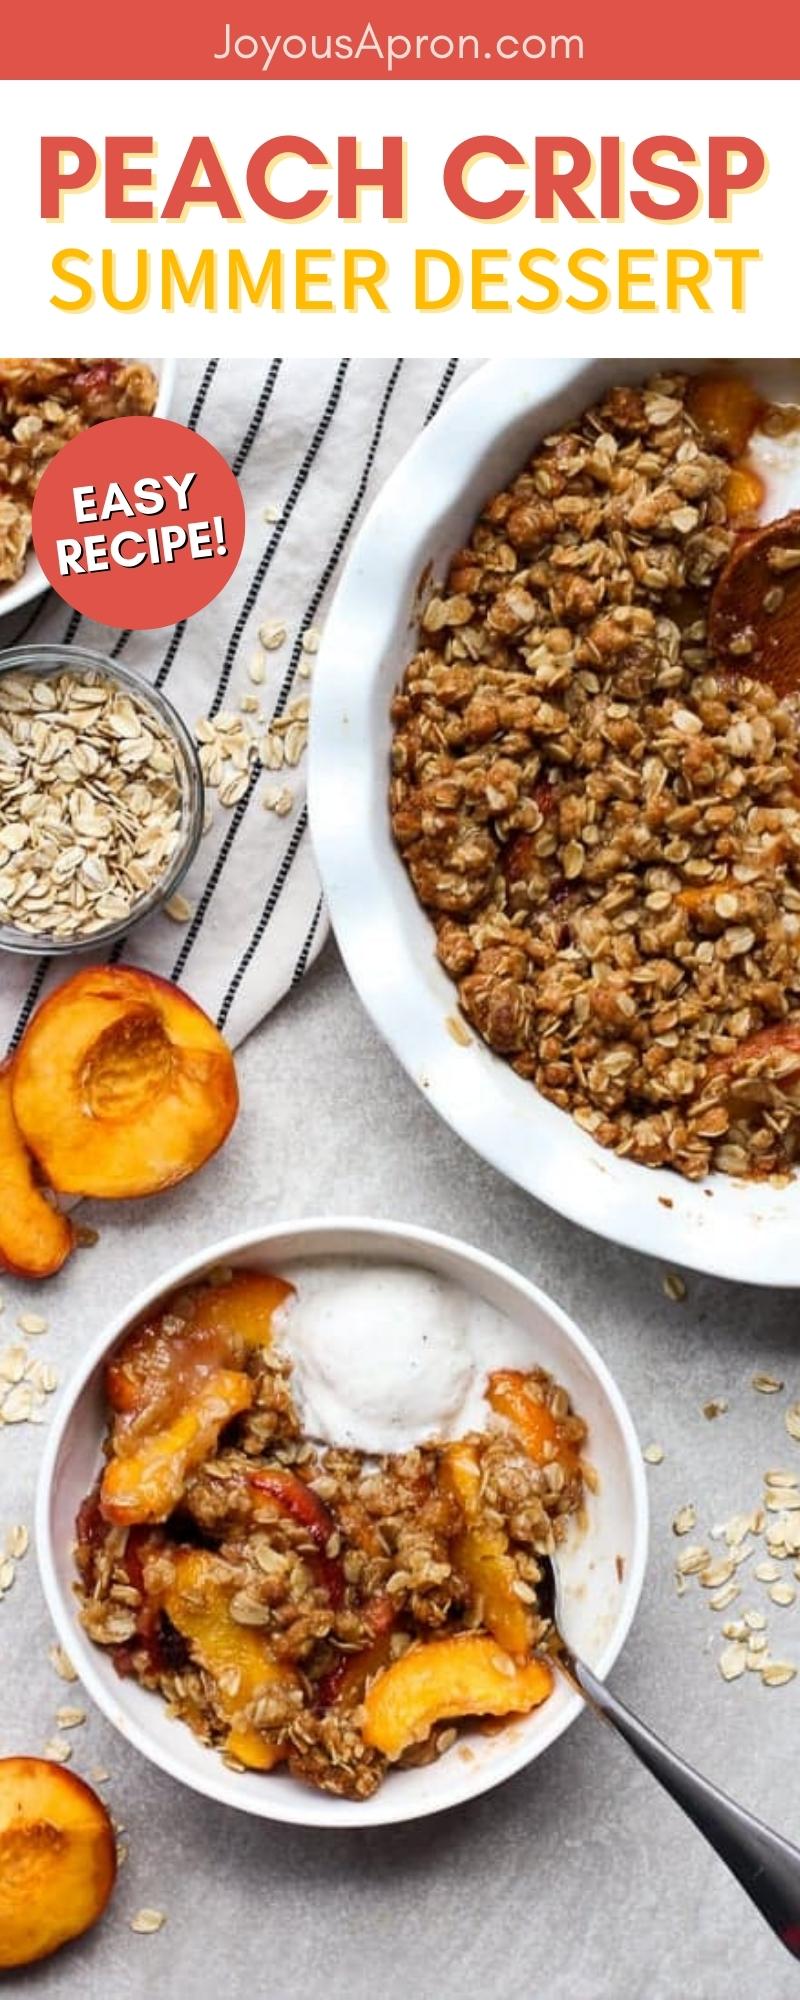 Easy Peach Crisp - The perfect summer fruit dessert! This sweet treat is easy to make and super delicious! Top with vanilla ice cream for the perfect treat! via @joyousapron